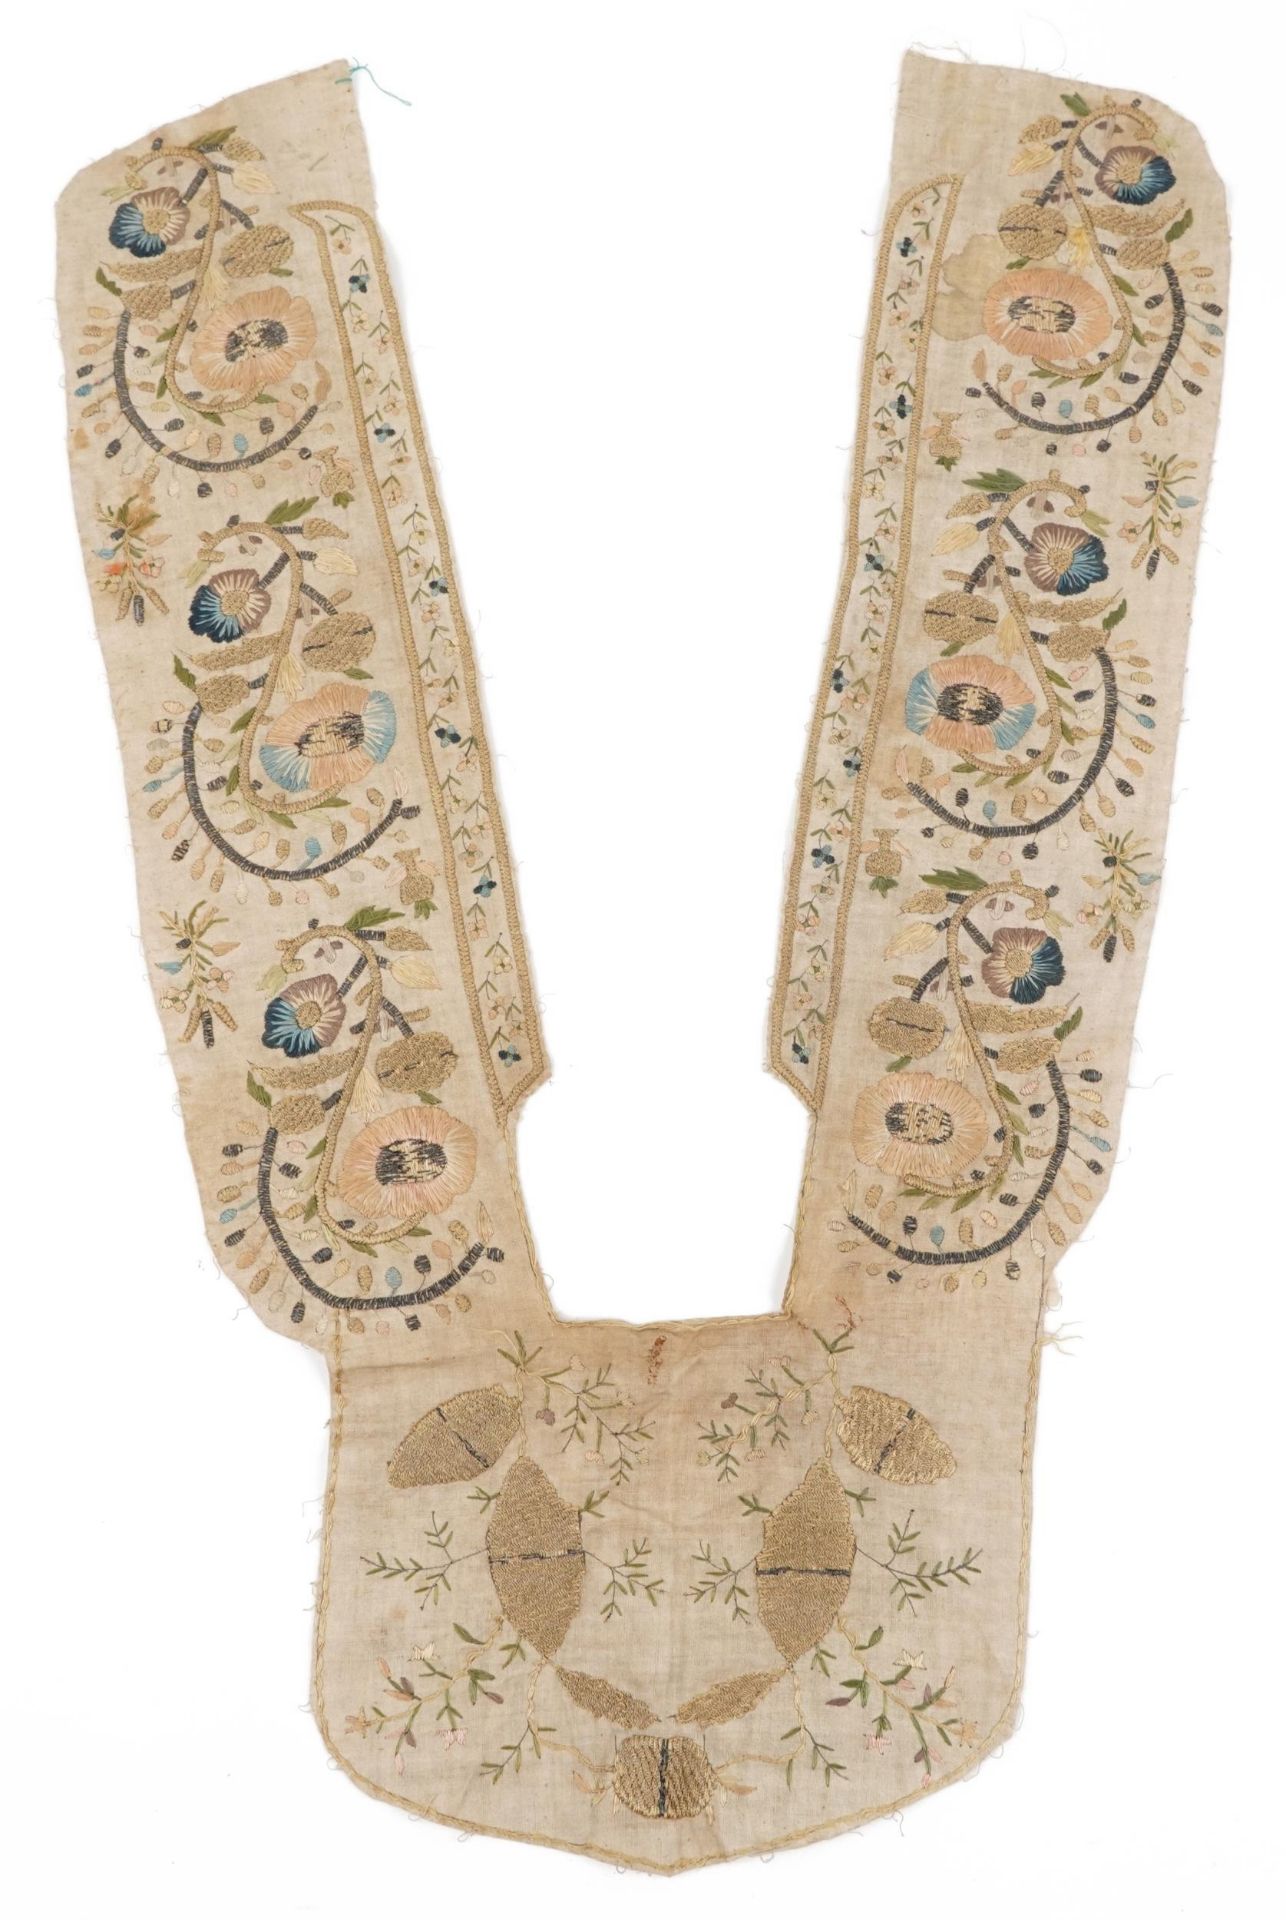 18th century Turkish Ottoman embroidered collar, 90cm in length